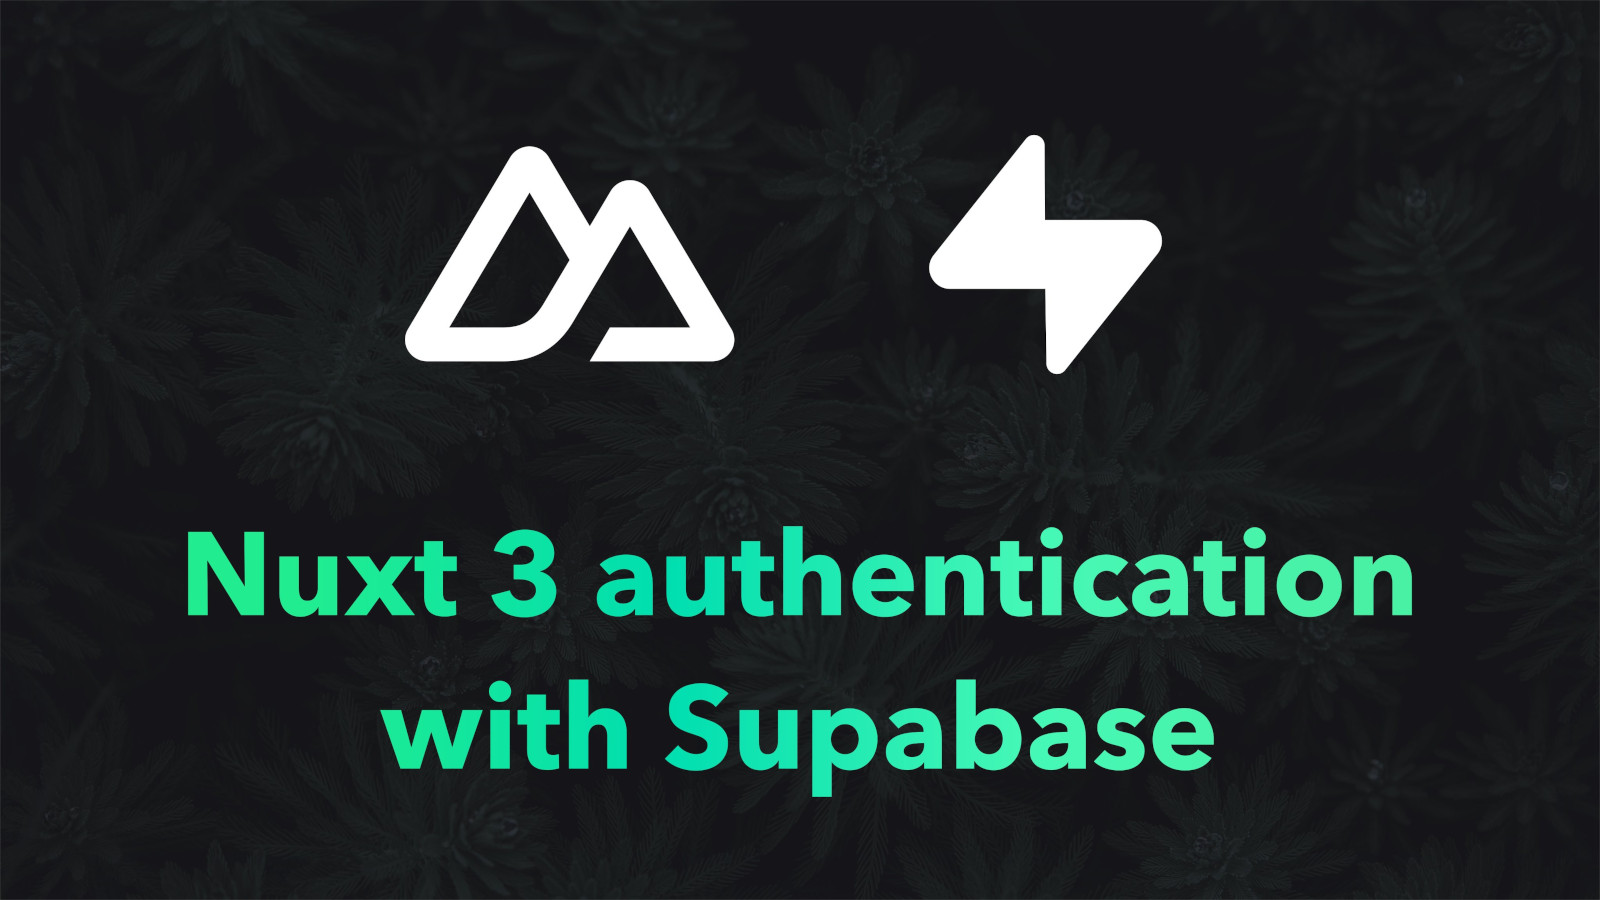 Poster to Nuxt 3 authentication with Supabase